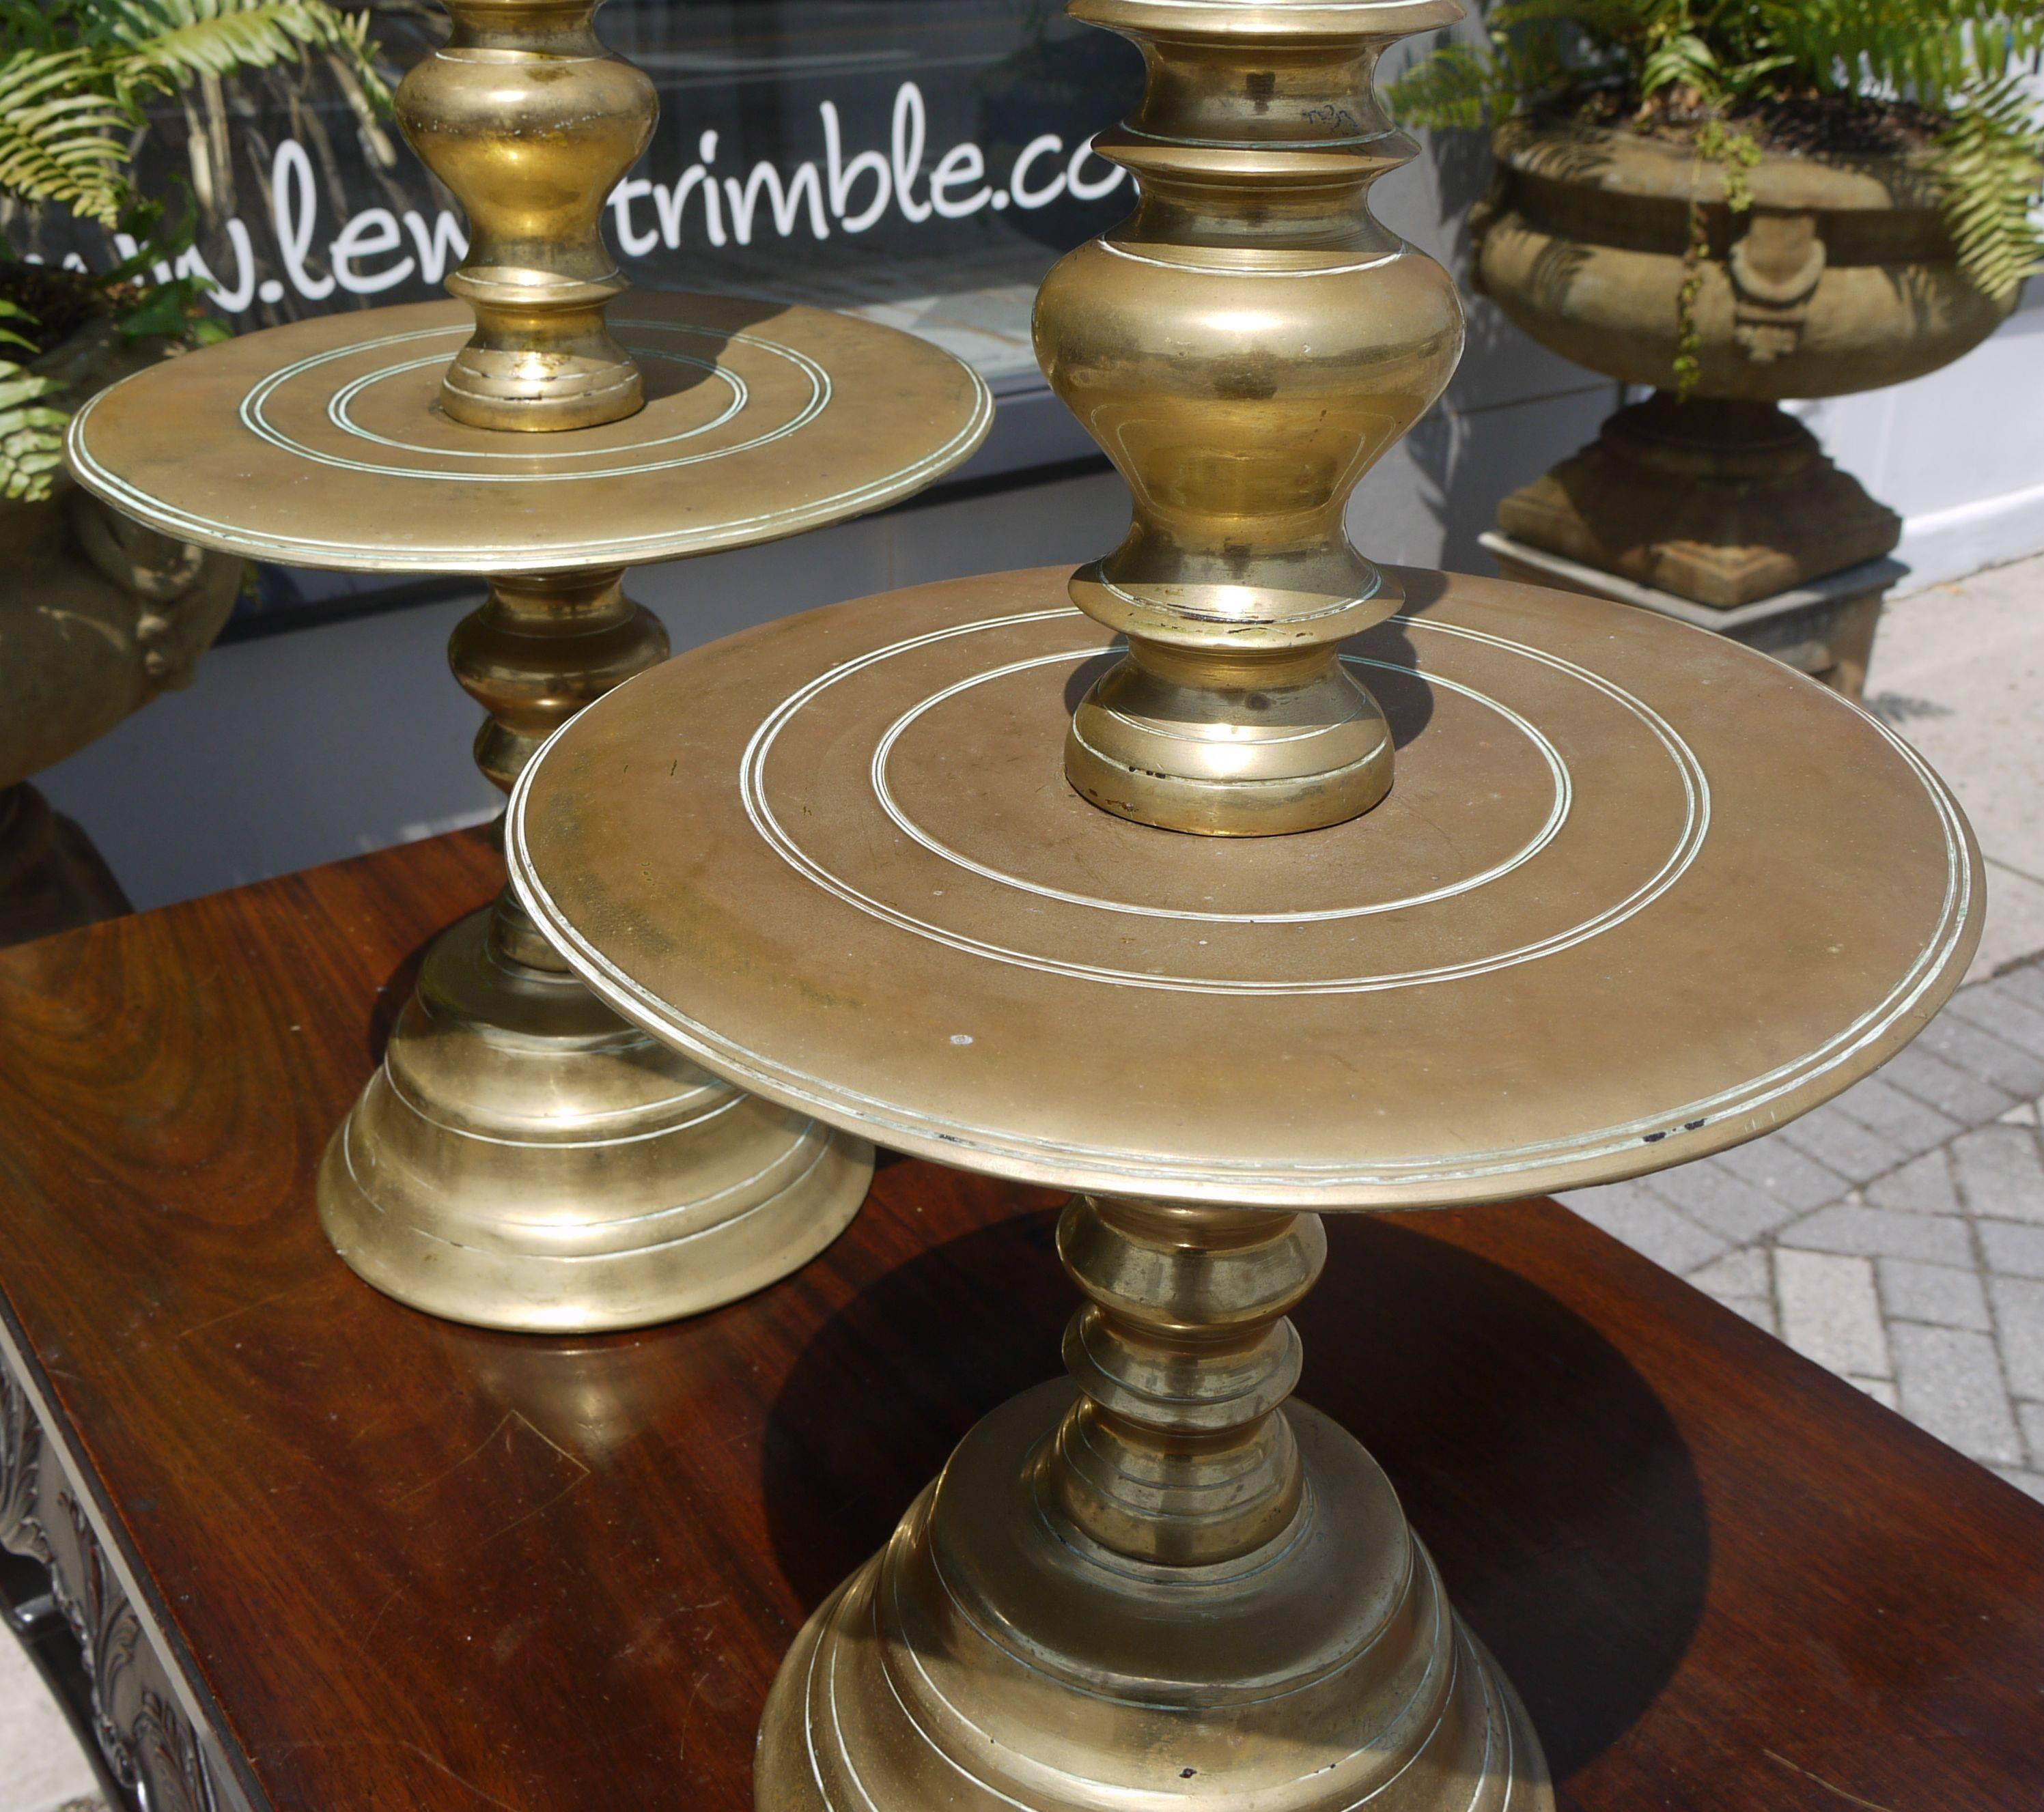 Massive Pair of Early 19th Century Brass Candlesticks In Good Condition For Sale In Kilmarnock, VA